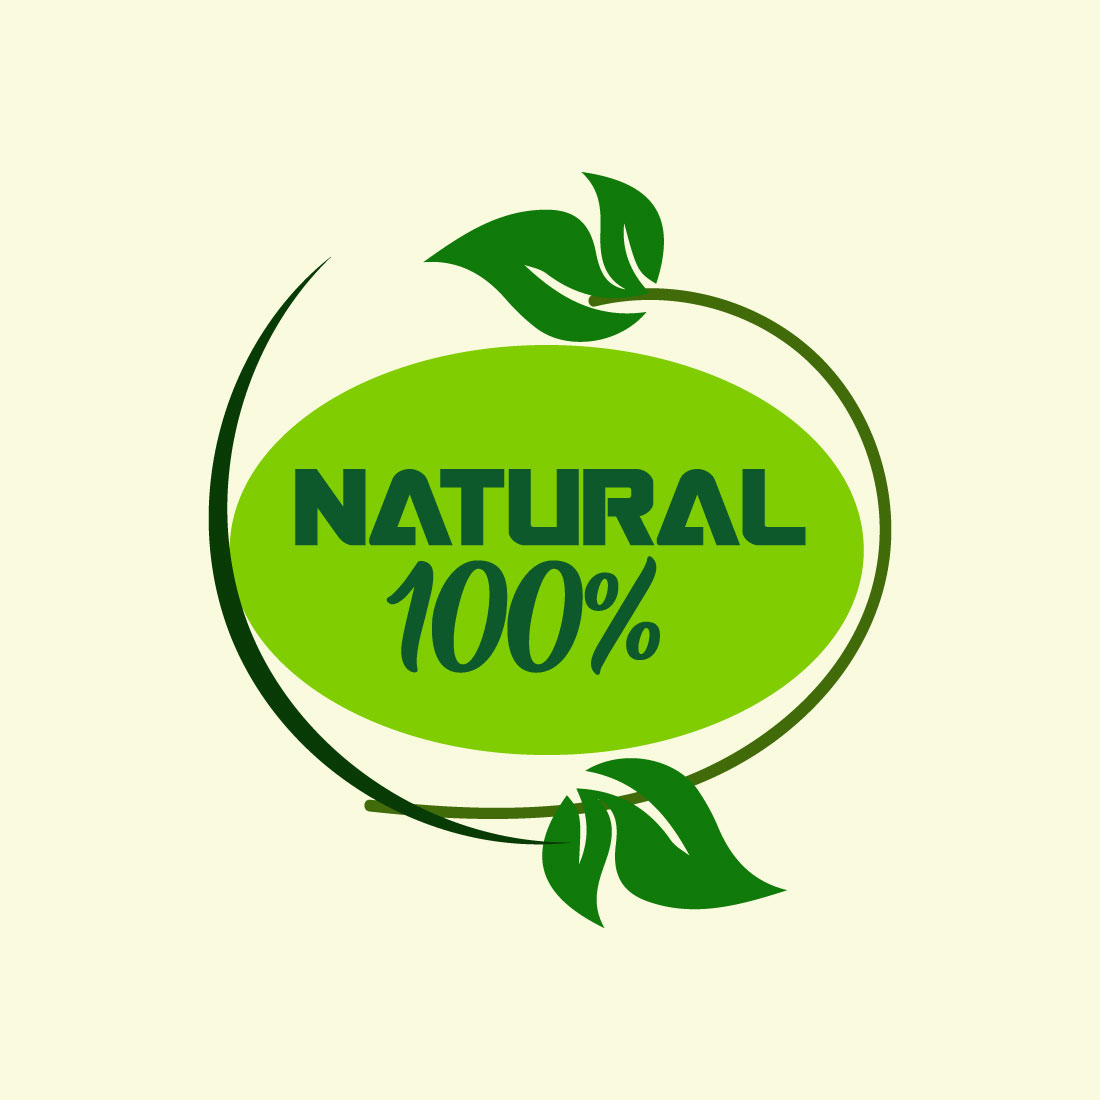 Free green product logo cover image.